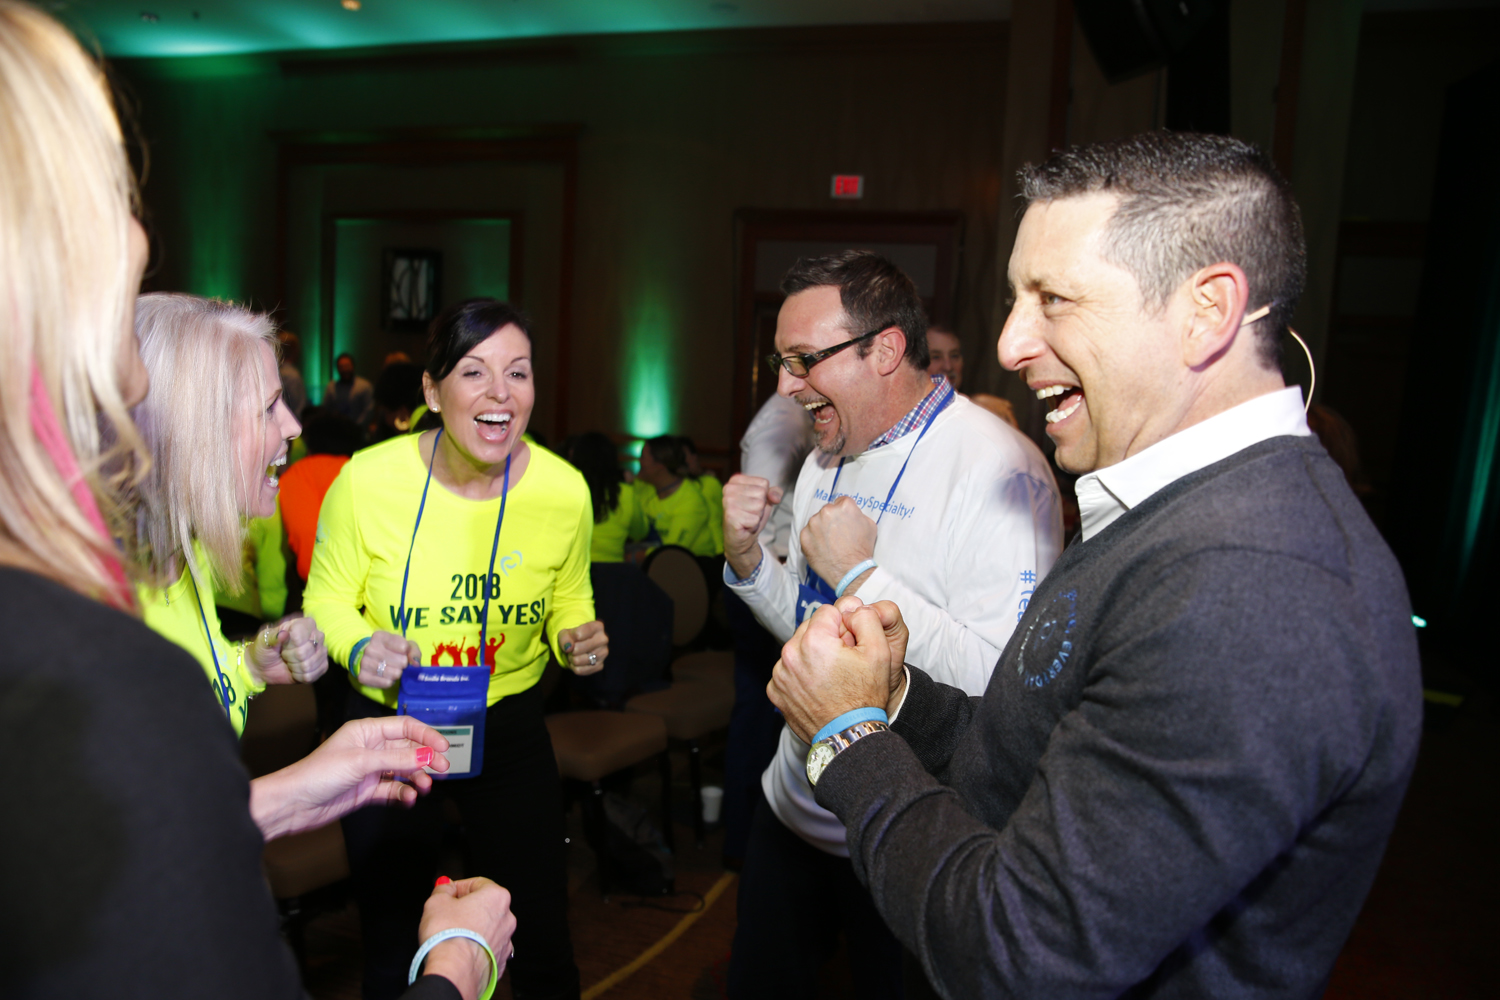 Steve Bilt, co-founder and CEO, embracing the theme of "Get Loud" with Smile Brands team members